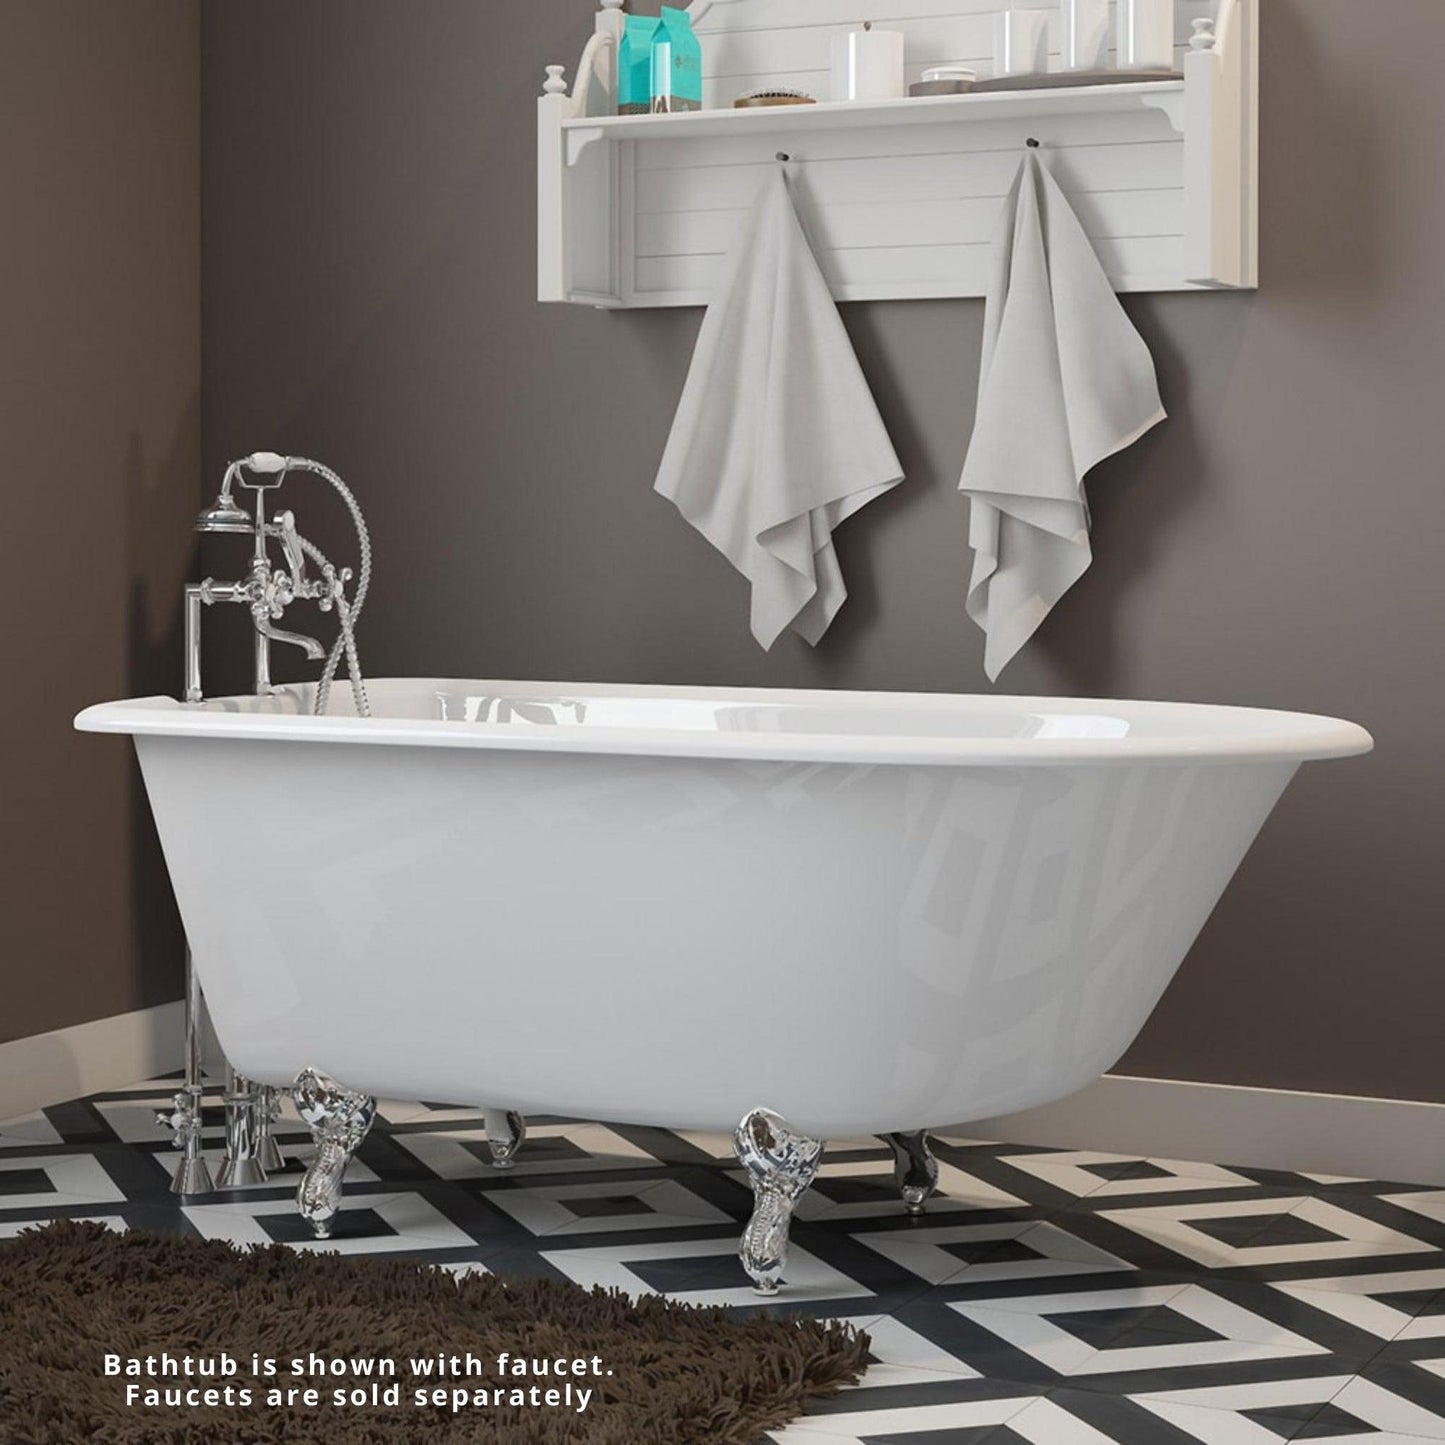 Cambridge Plumbing 60" White Cast Iron Rolled Rim Clawfoot Bathtub With Deck Holes With Polished Chrome Feet